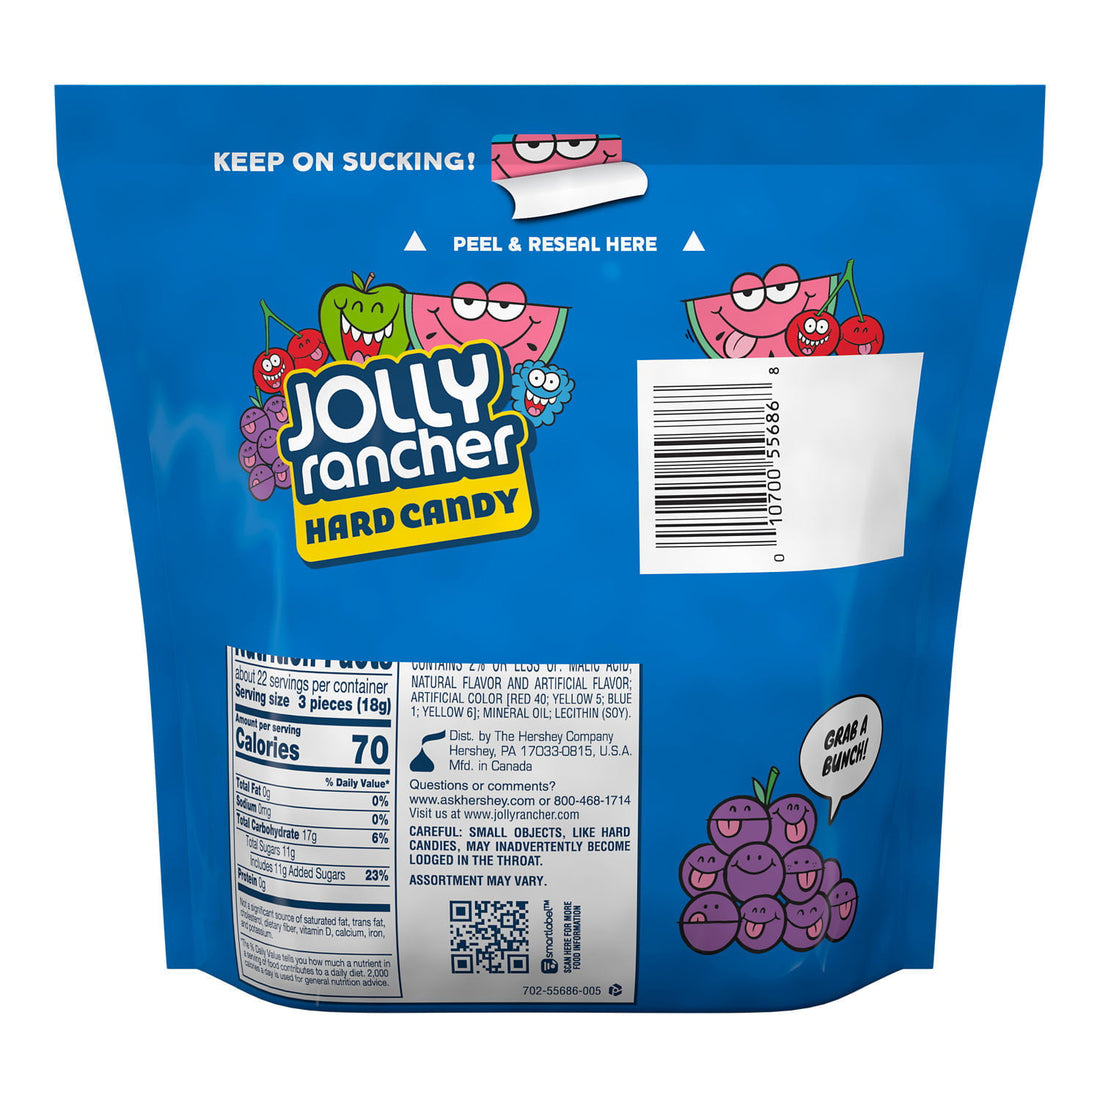 JOLLY RANCHER Assorted Fruit Flavored Hard, Easter Candy Resealable Bag, 14 oz